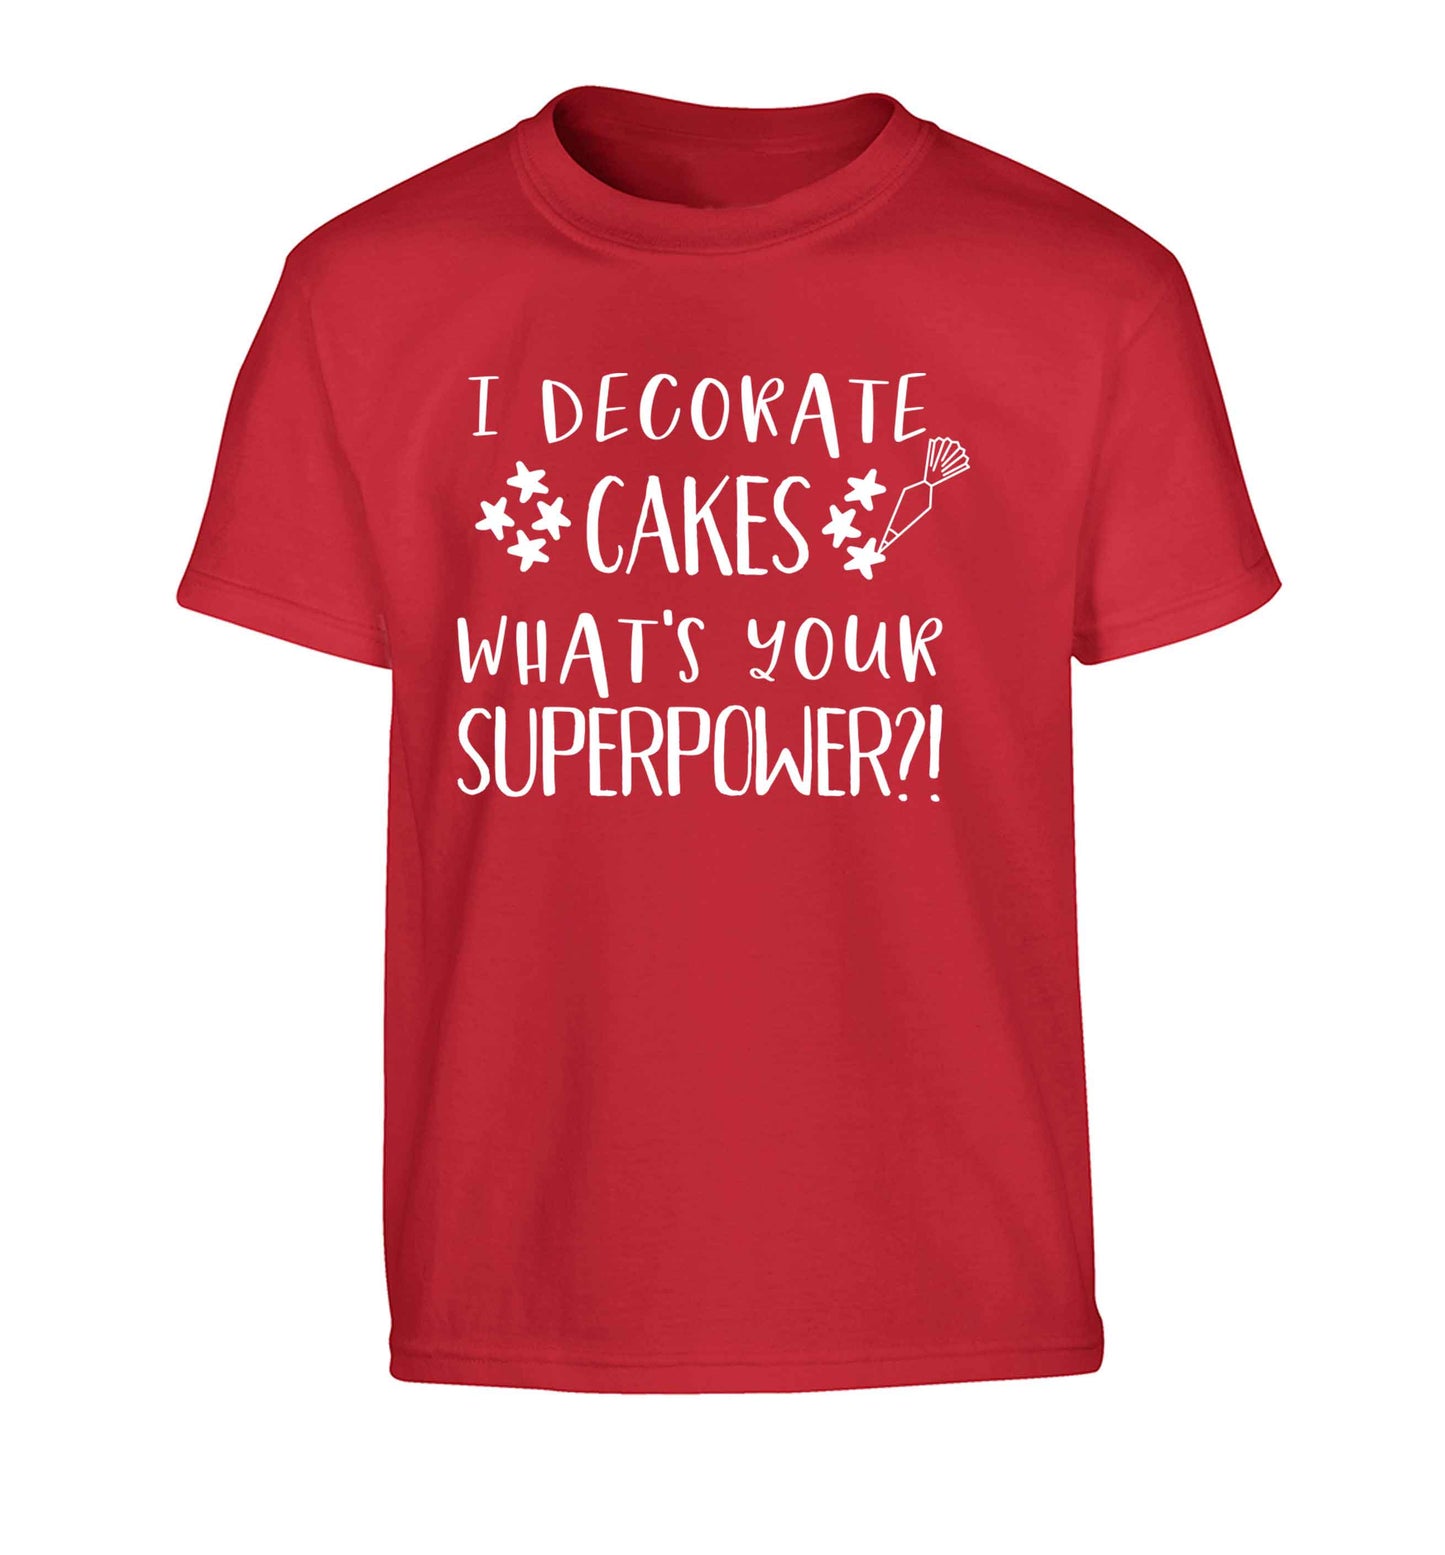 I decorate cakes what's your superpower?! Children's red Tshirt 12-13 Years